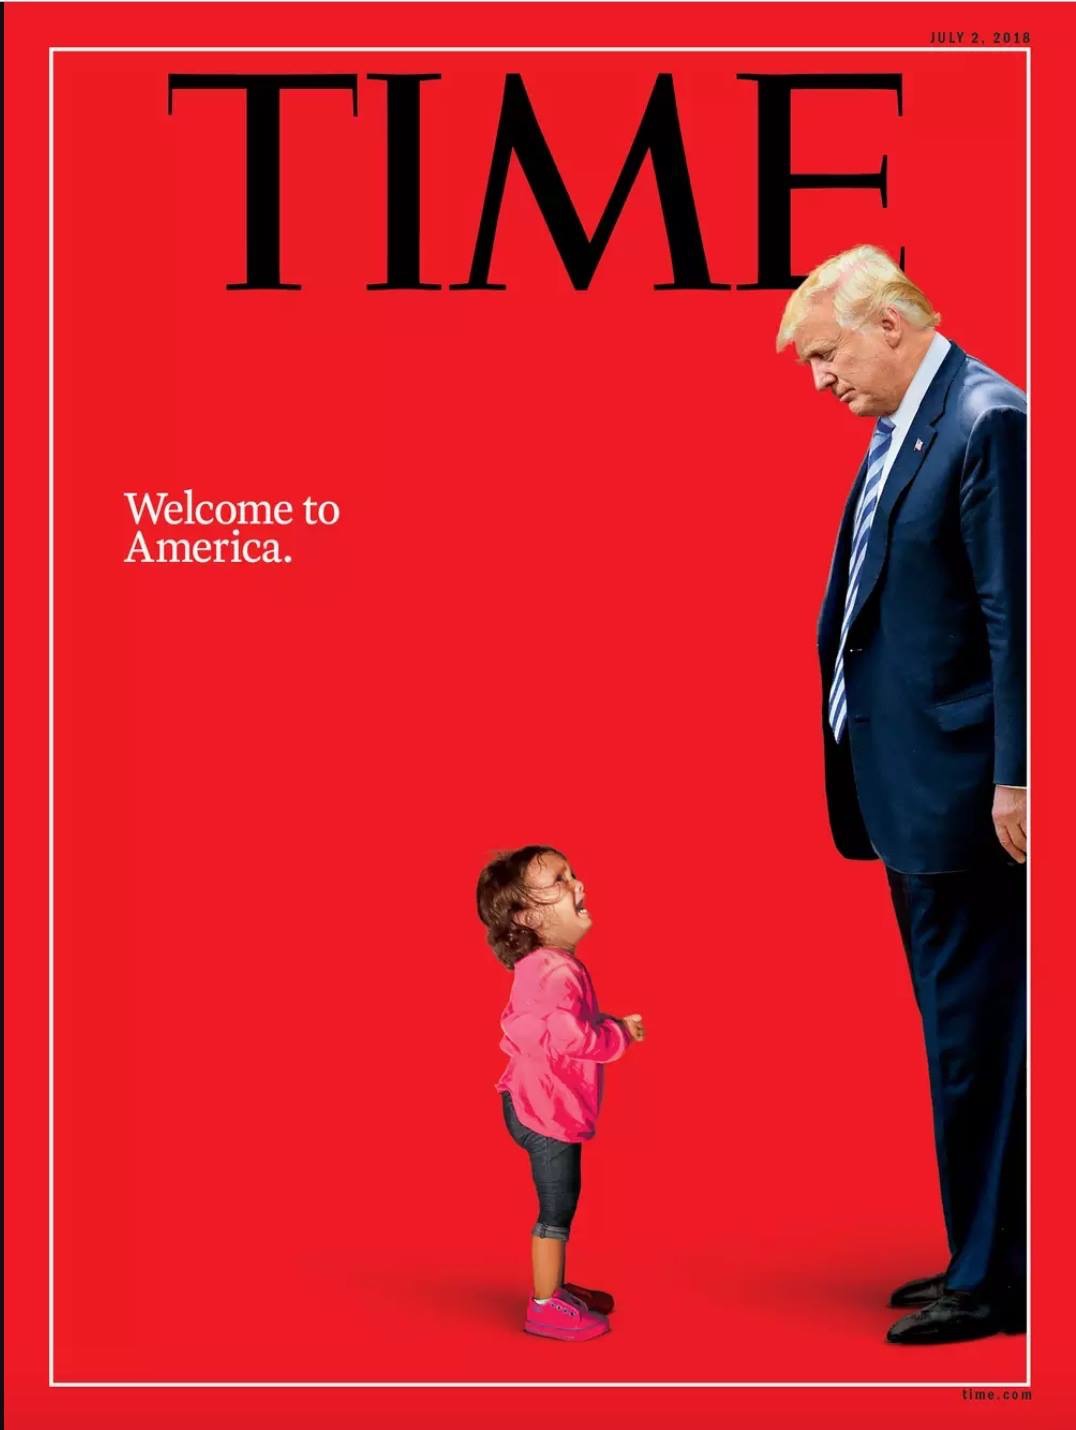 time magazine trump immigrant child - Time Welcome to America. time.com